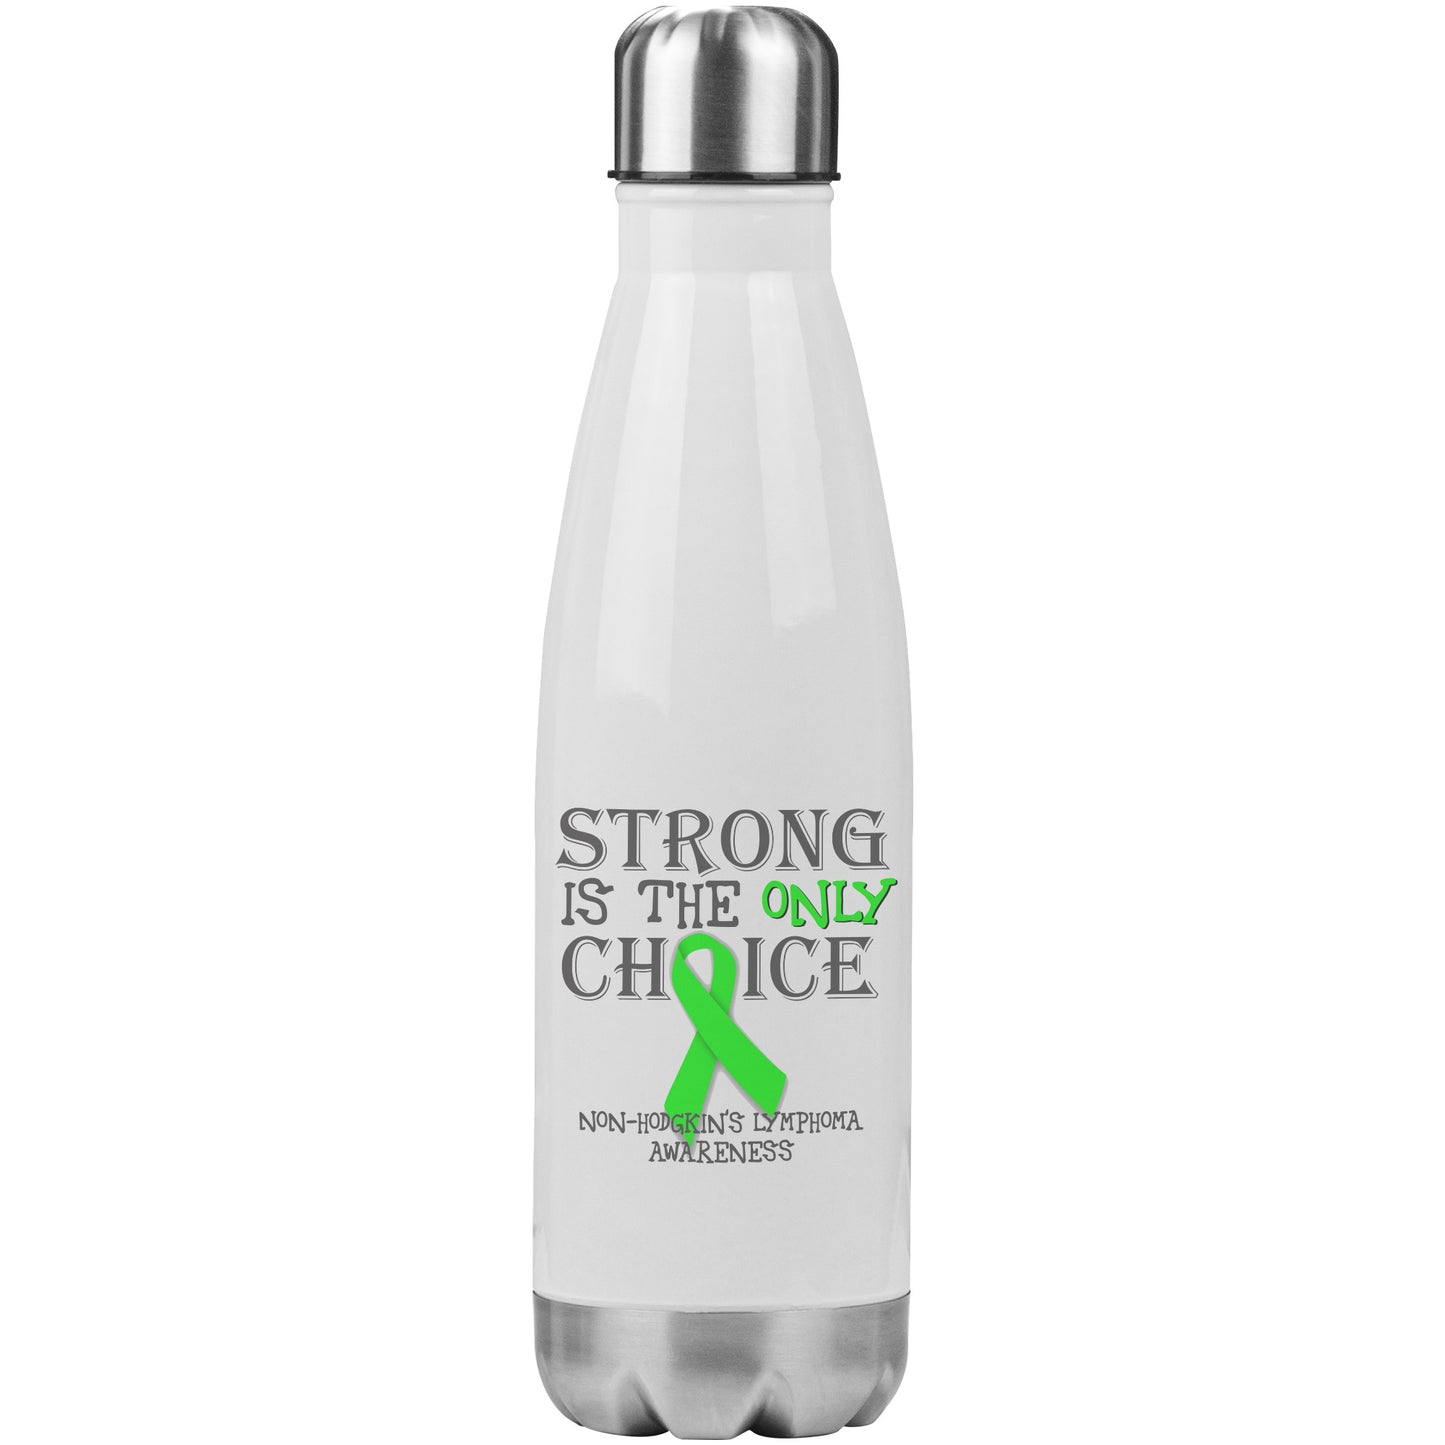 Strong is the Only Choice -Non-Hodgkin's Lymphoma Awareness 20oz Insulated Water Bottle